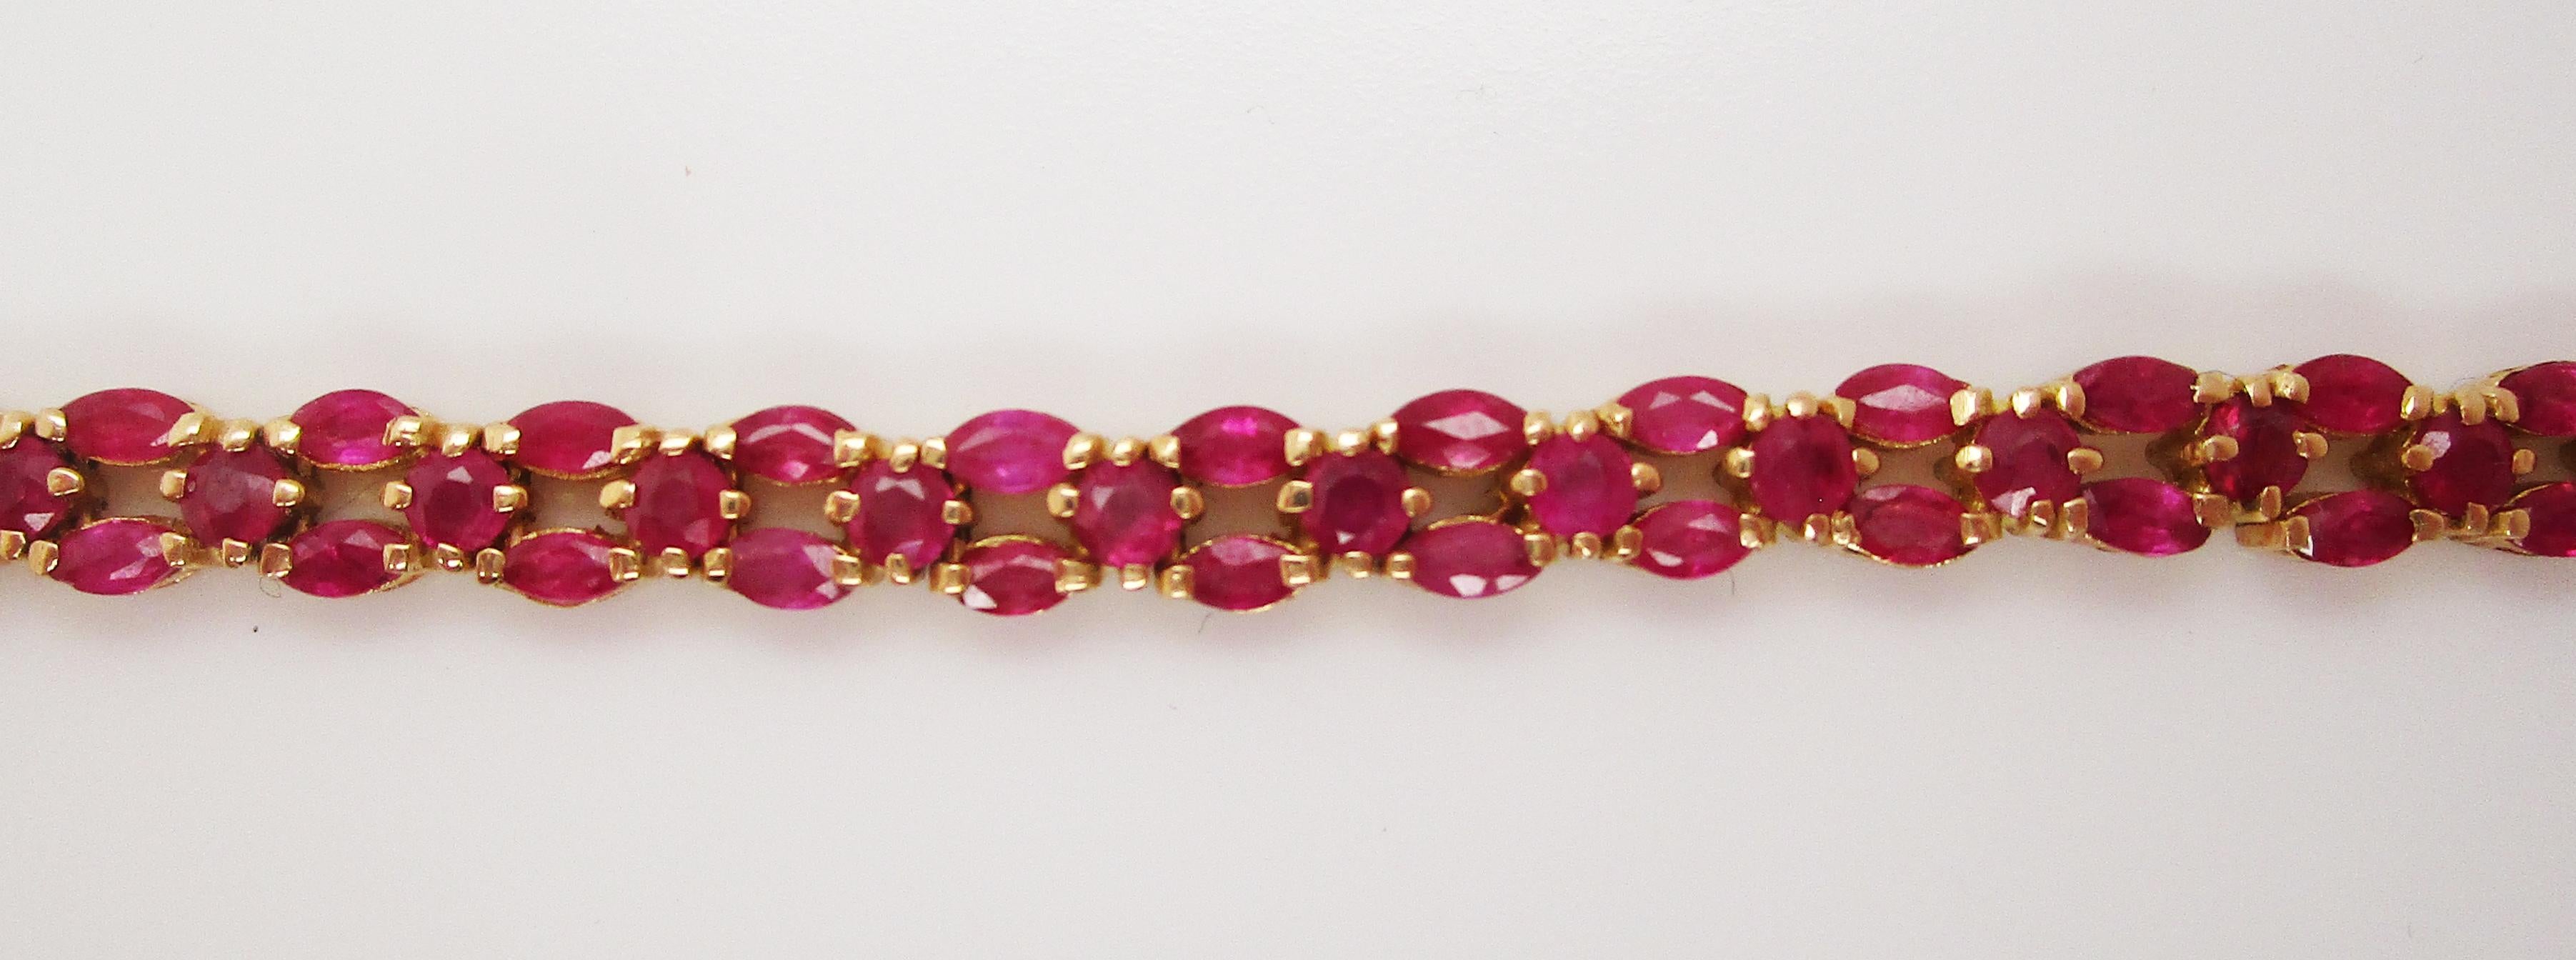 This is a gorgeous line bracelet in 18k yellow gold featuring five carats of lovely bright red rubies! The bracelet features a unique layout of round and marquise-shaped rubies. The bracelet is flexible, comfortable, and easy to wear. The